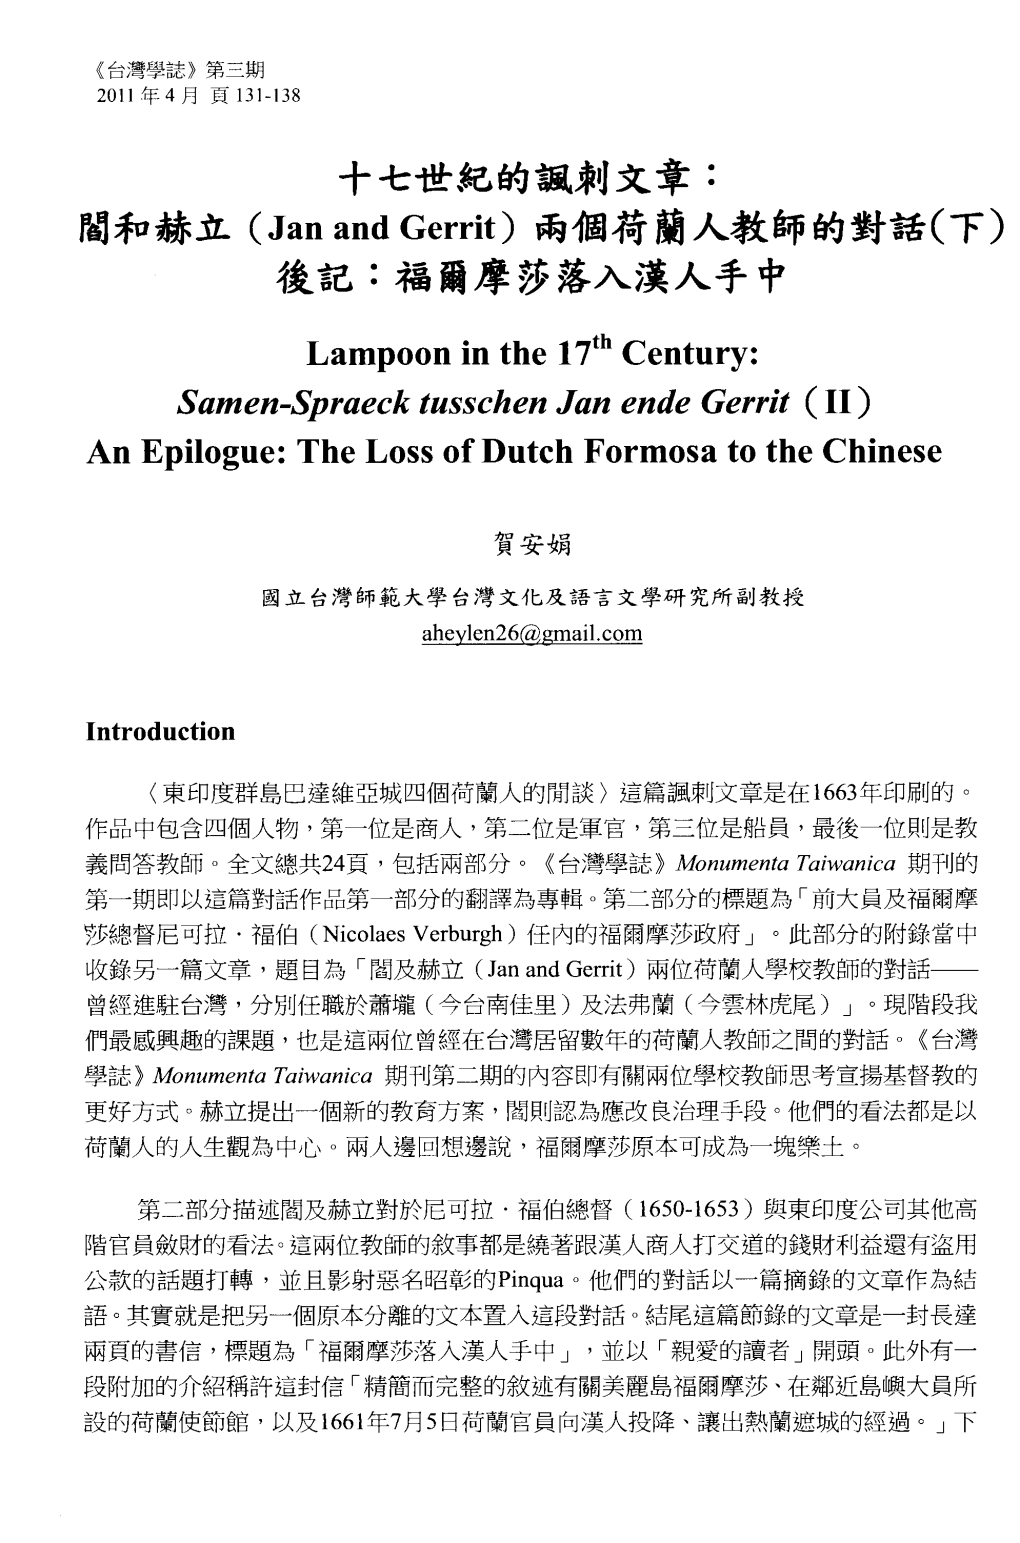 The Loss of Dutch Formosa to the Chinese